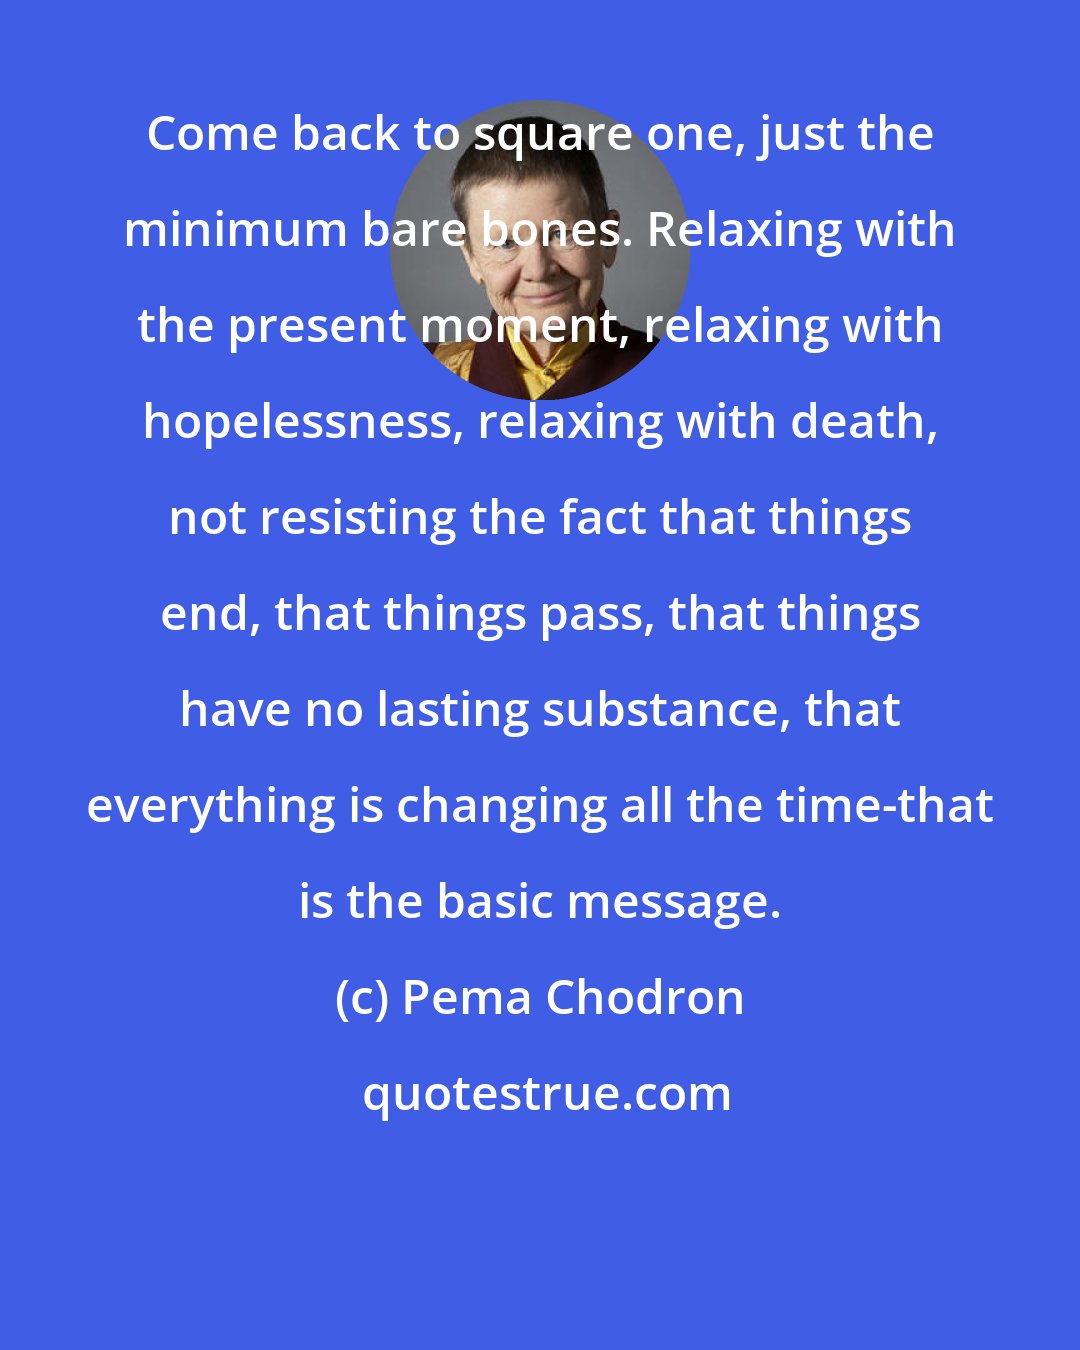 Pema Chodron: Come back to square one, just the minimum bare bones. Relaxing with the present moment, relaxing with hopelessness, relaxing with death, not resisting the fact that things end, that things pass, that things have no lasting substance, that everything is changing all the time-that is the basic message.